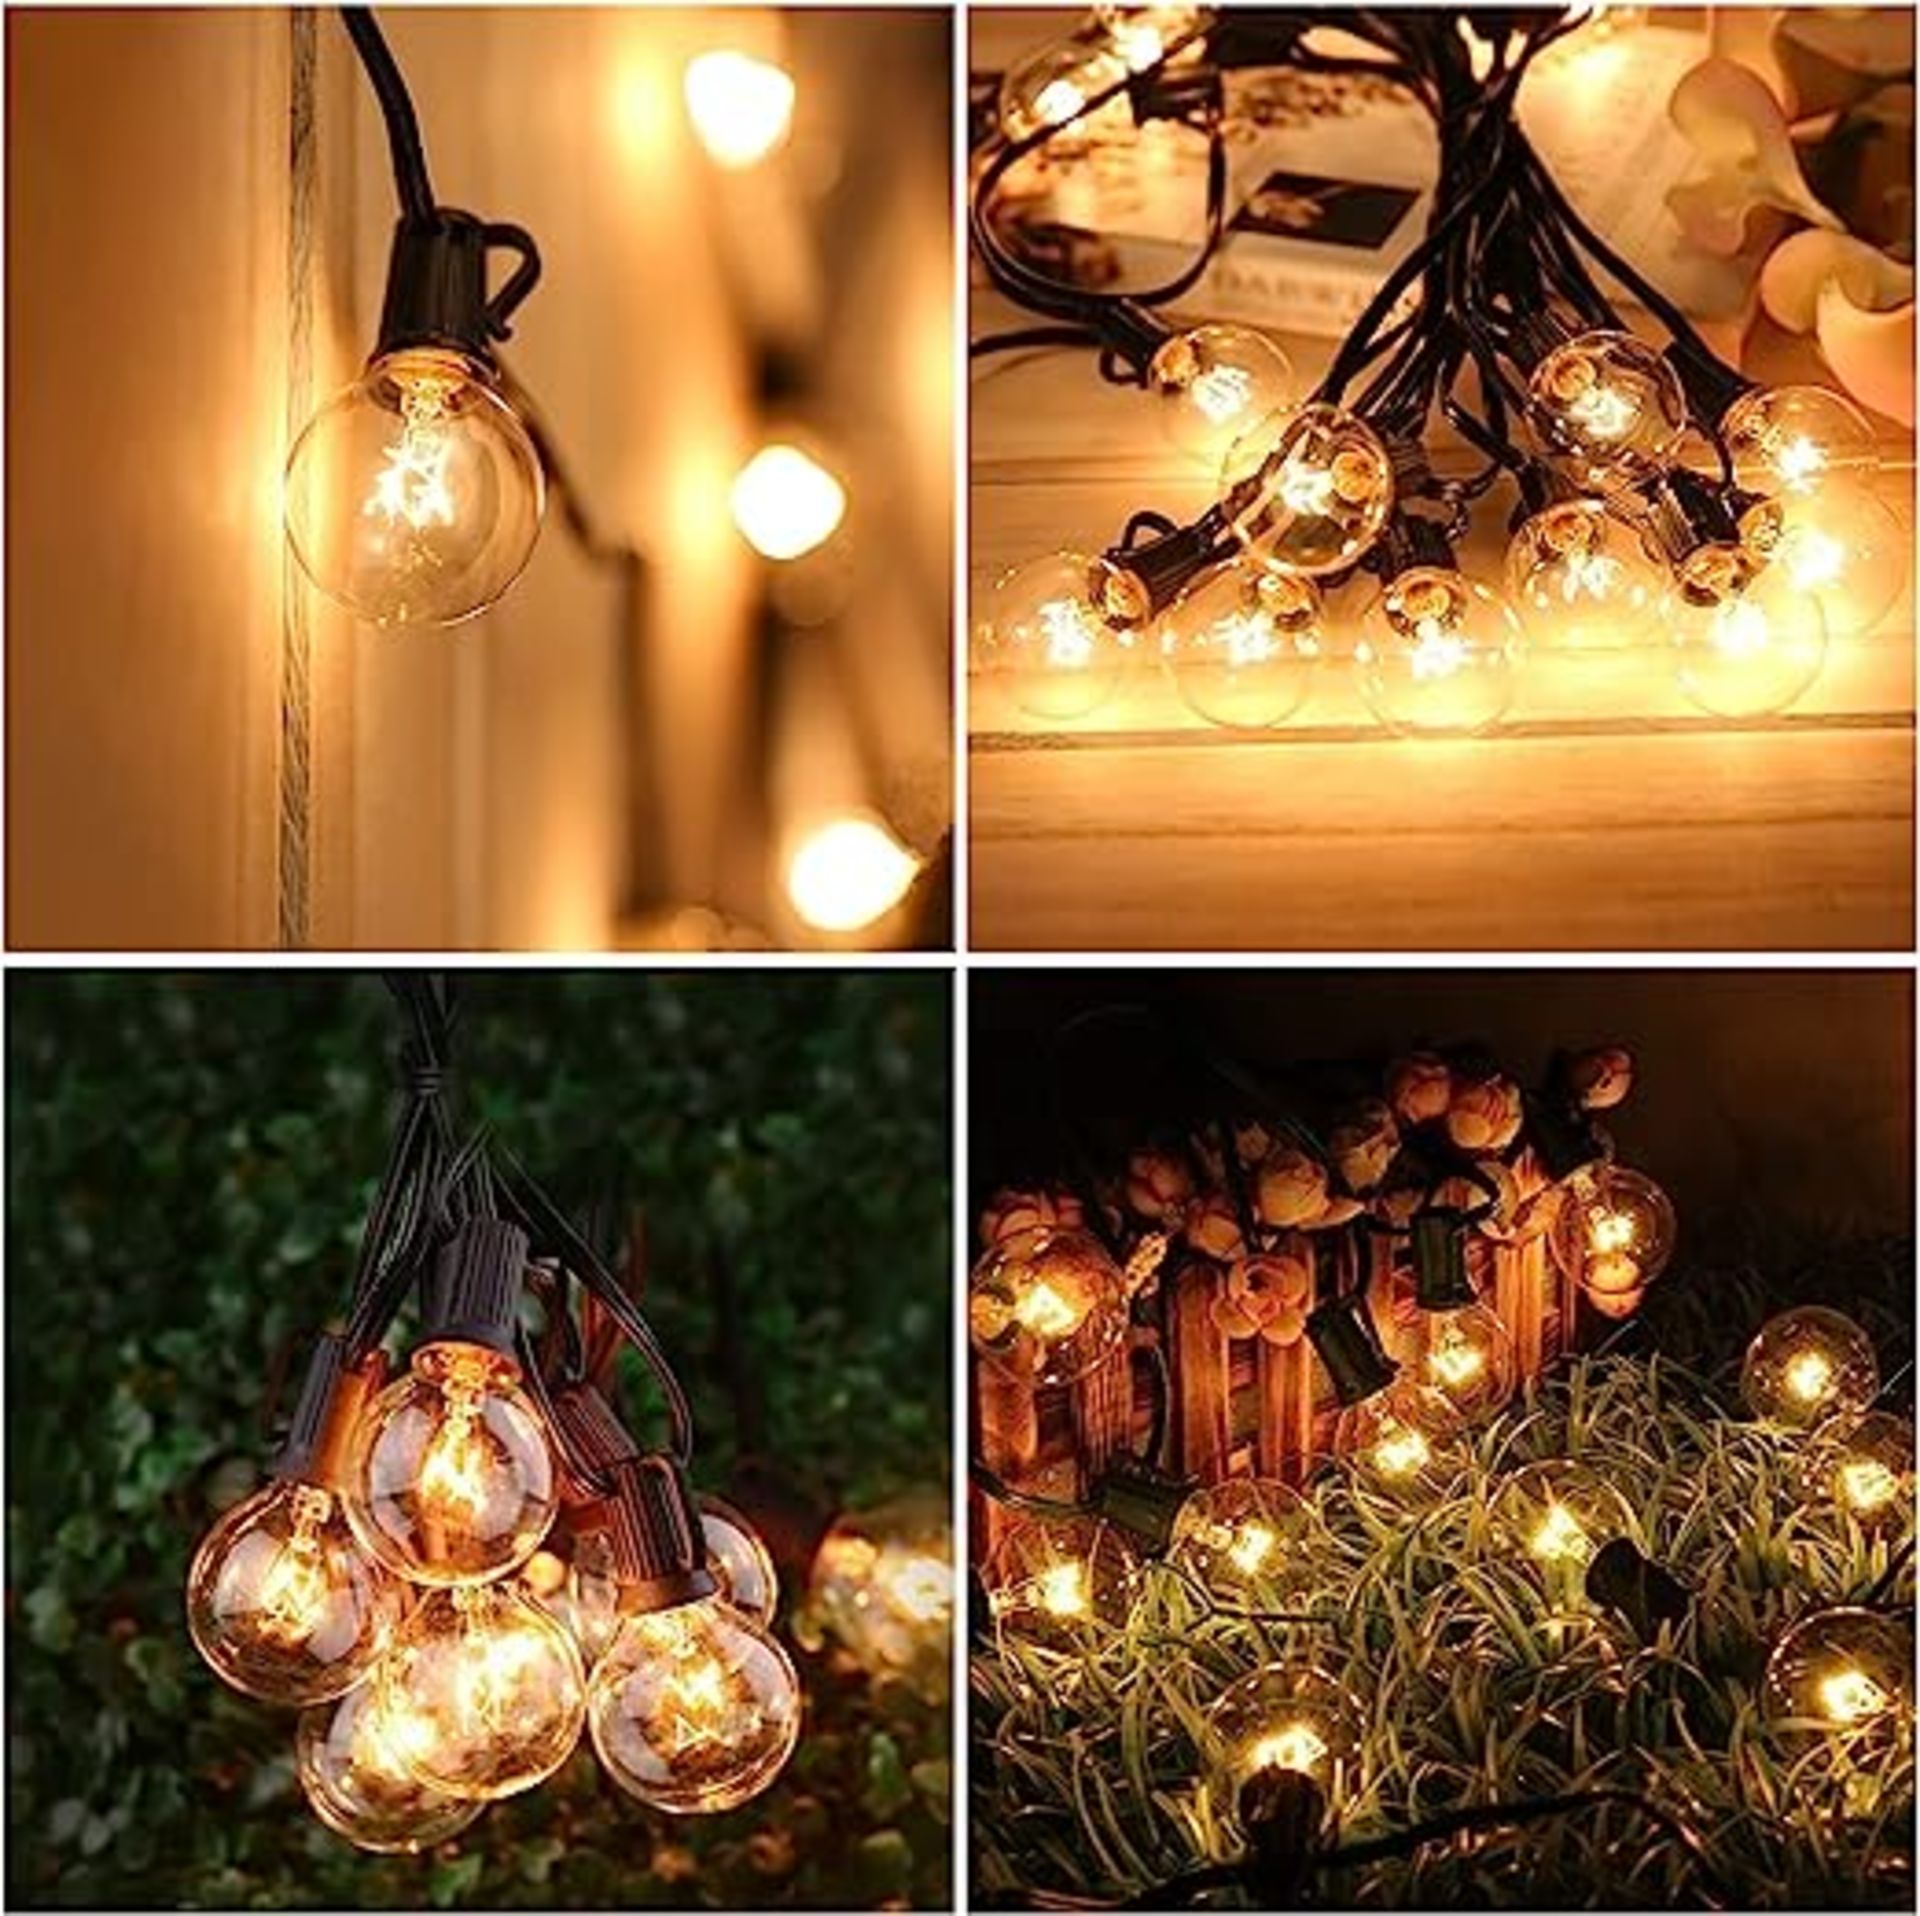 Pallet to contain 108 x New Boxed Sets of 25 Outdoor Festoon String Lights. 7.5m Long (24.6 foot).